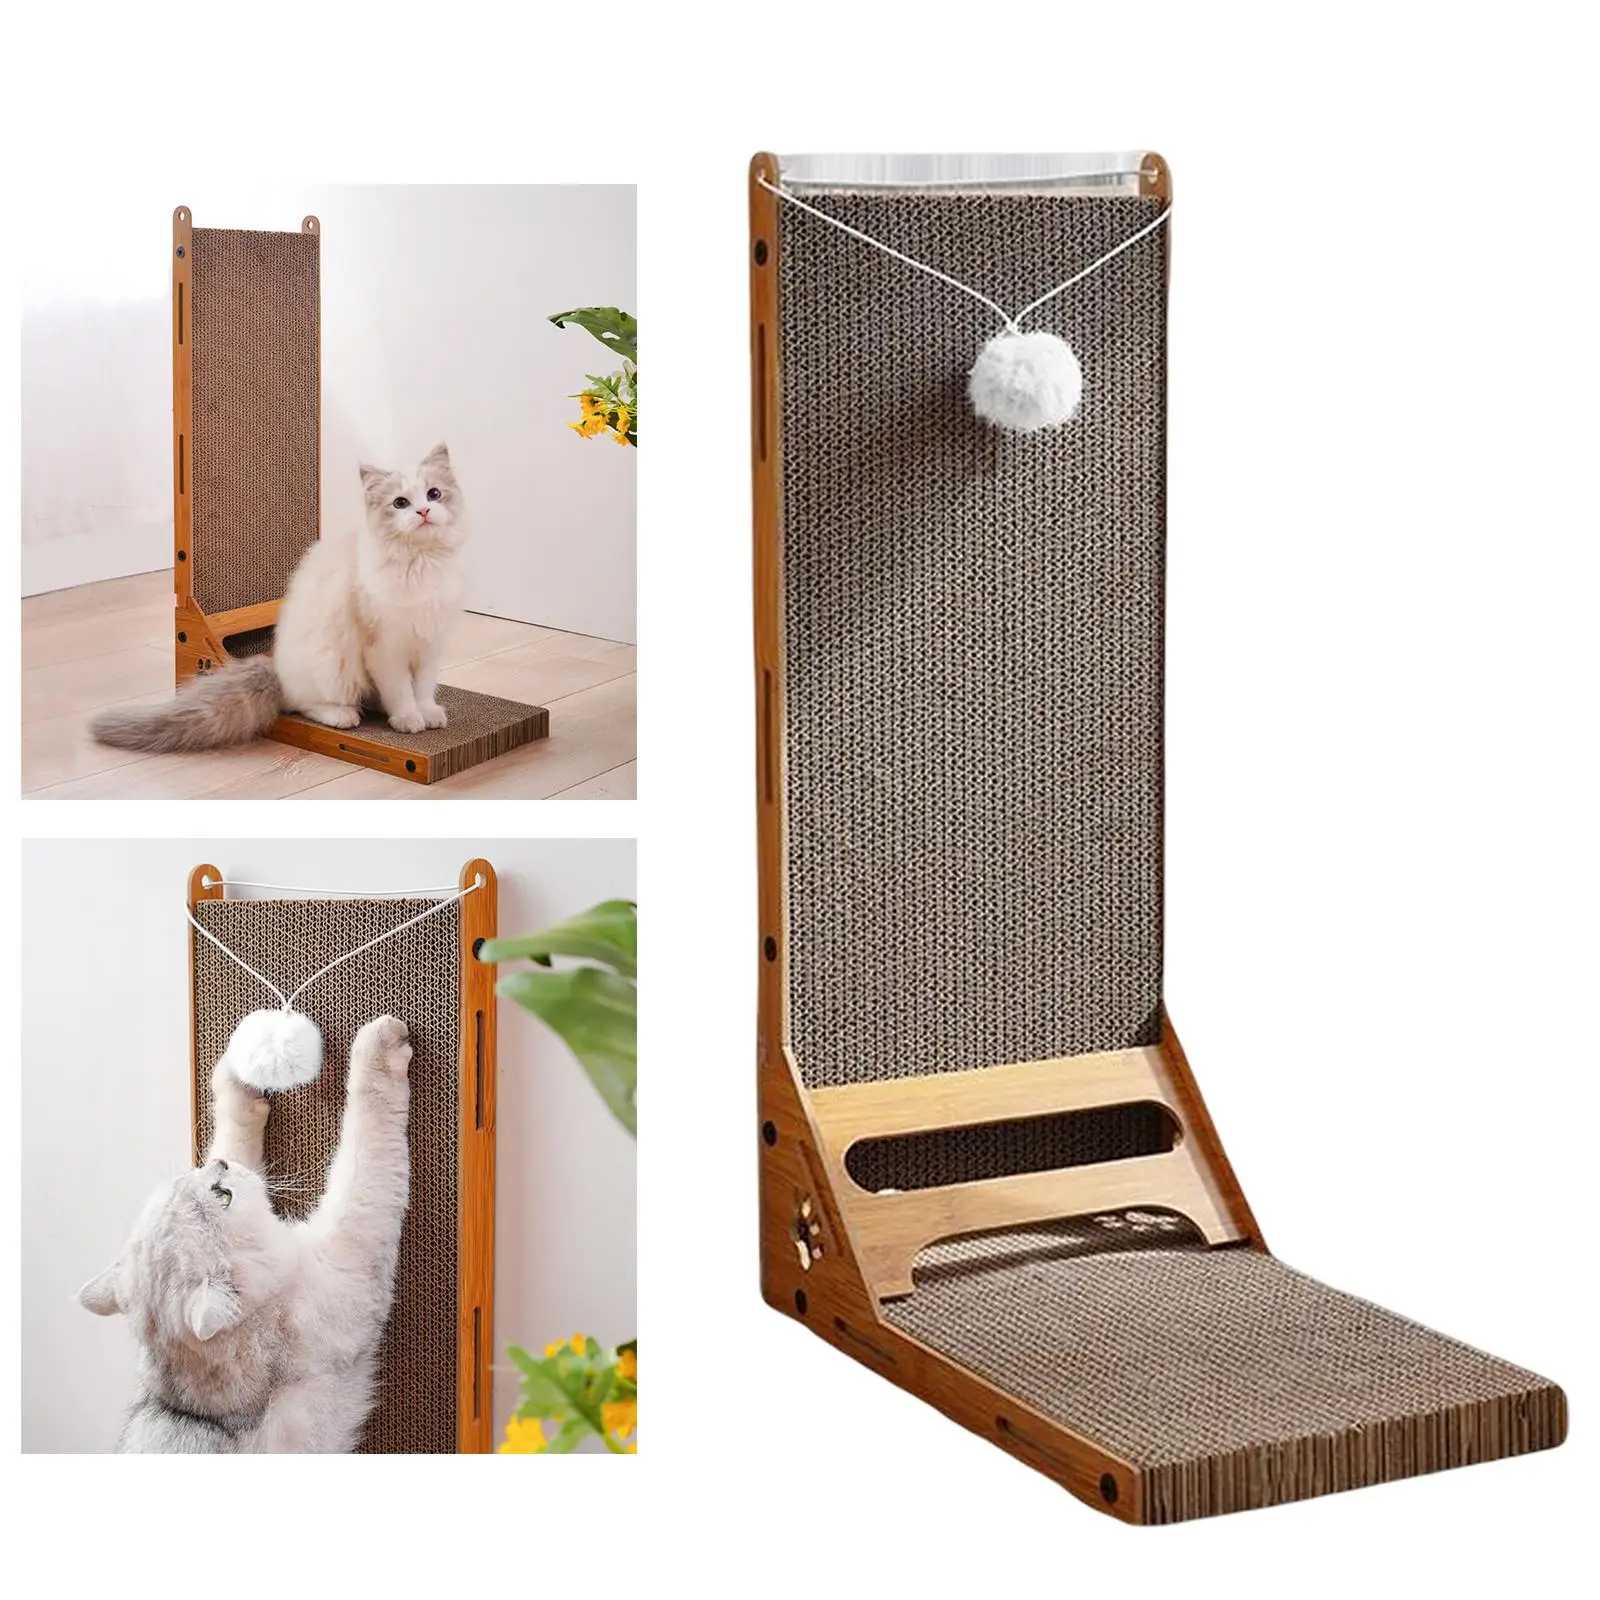 Durable Vertical Cat Scratcher Lounge Bed Home Decor with Ball Cardboard Scratch Pad Standing Scratching Board for Kitty Kitten